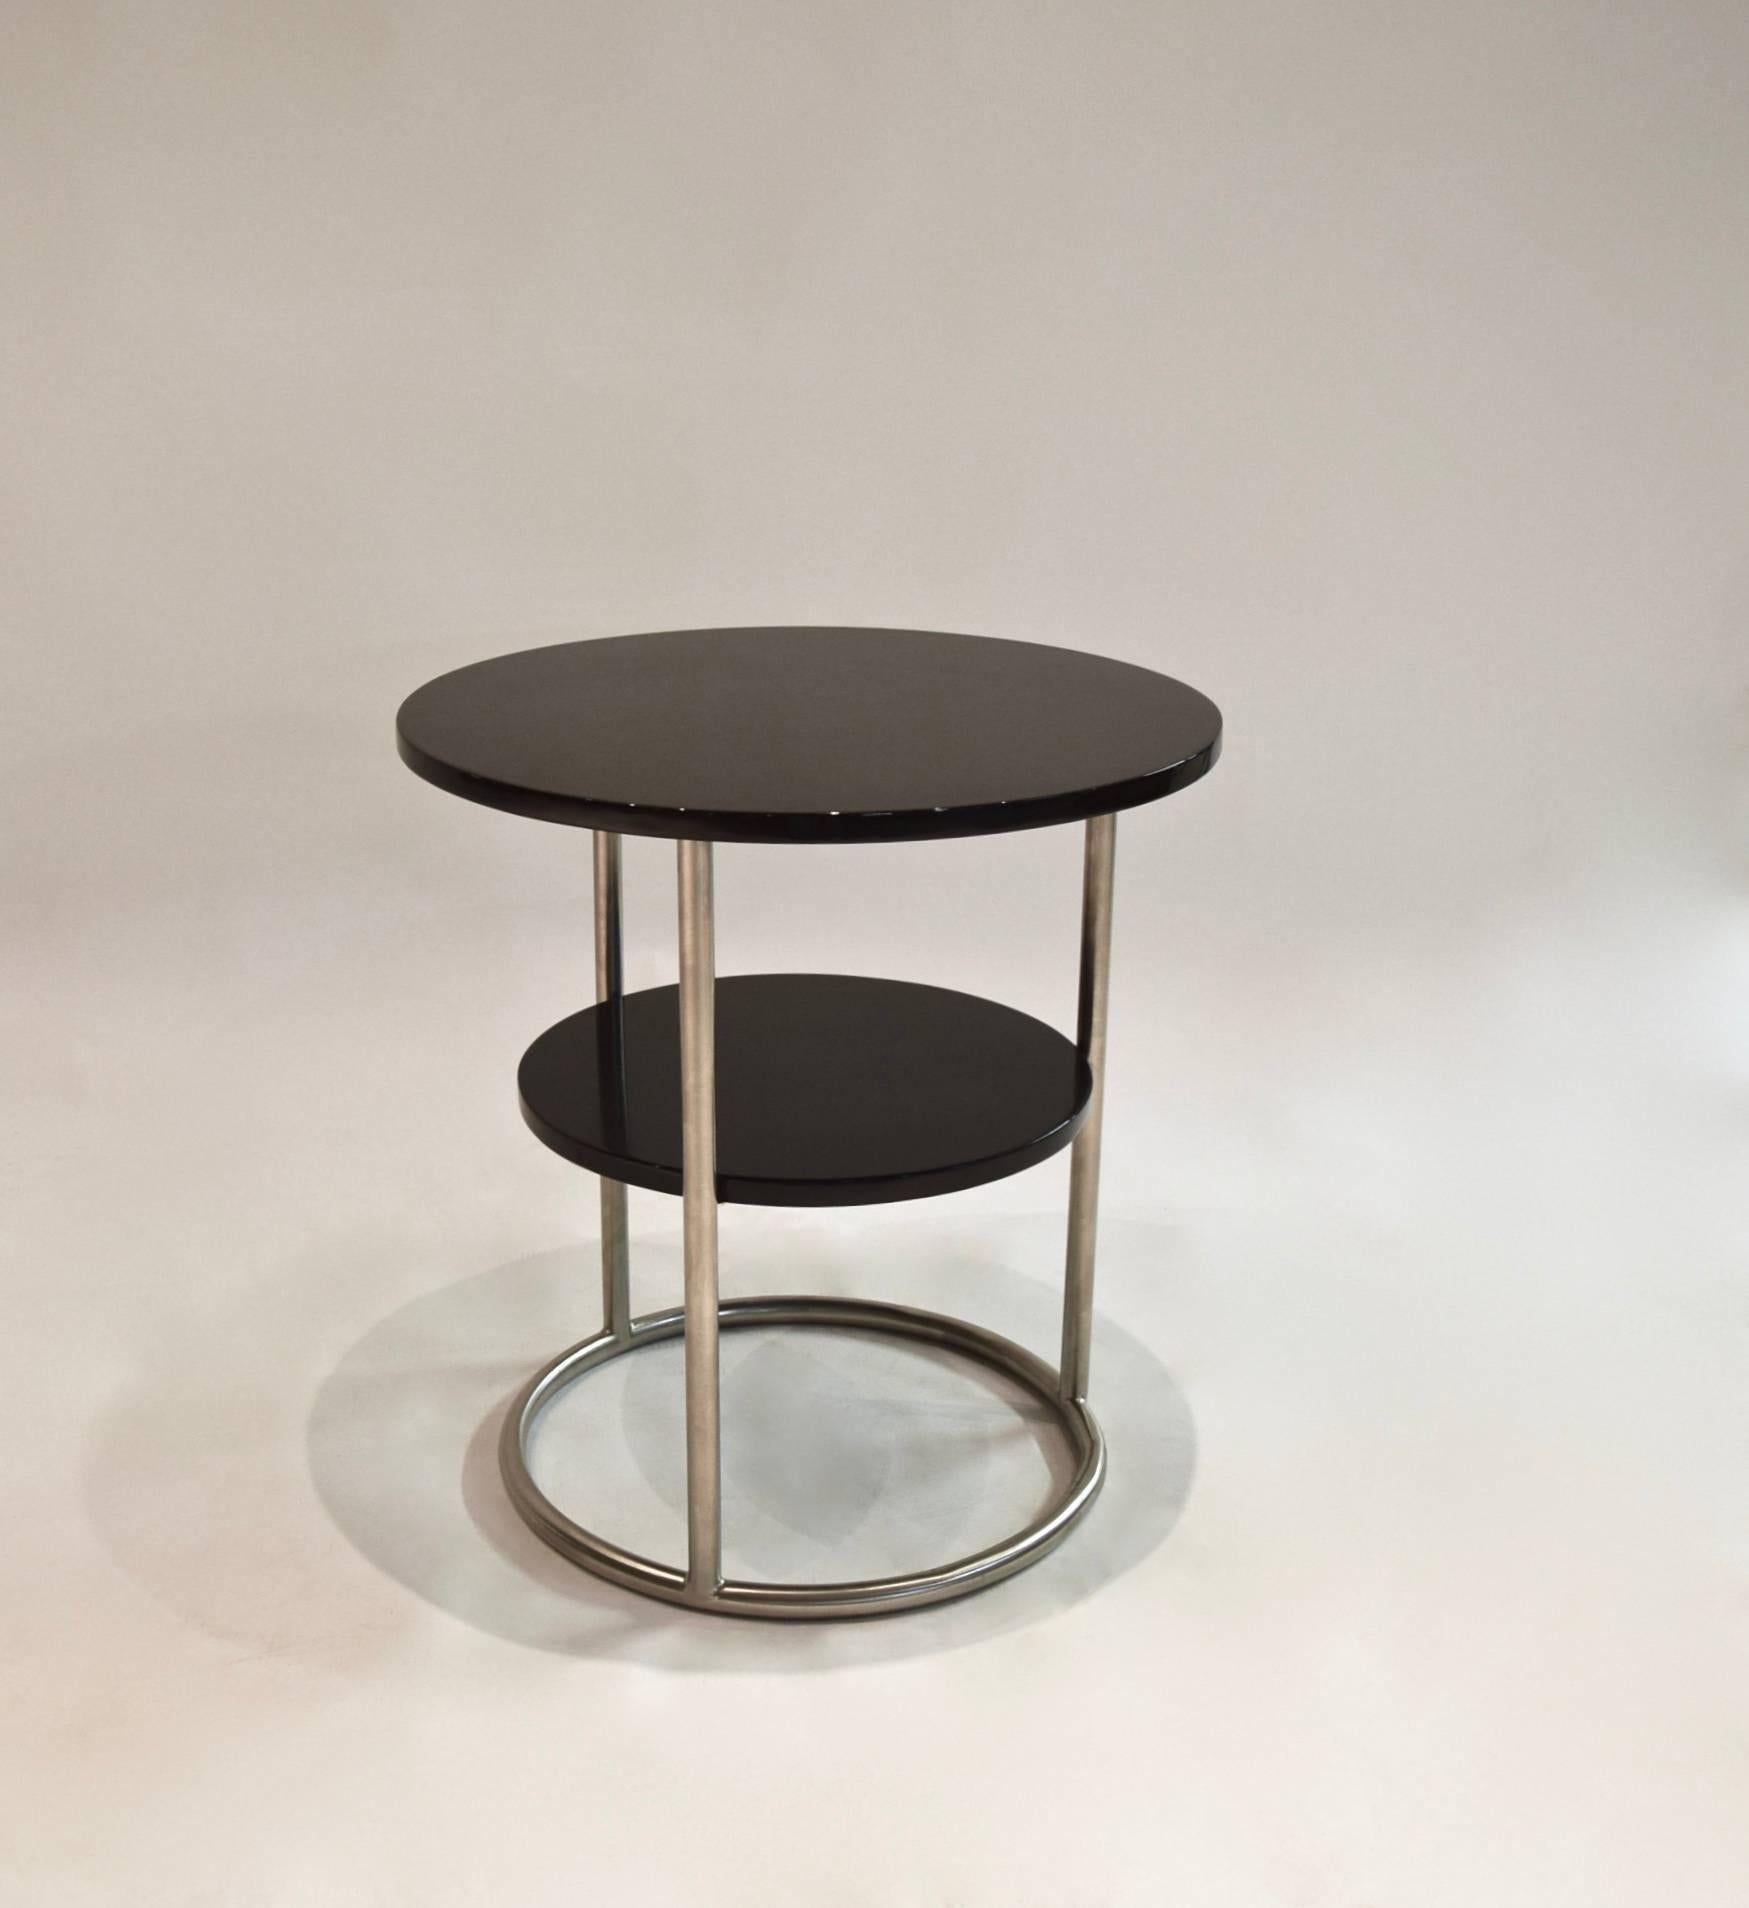 Late 20th Century Pair of Side Tables, Thonet 1930s Design, Made in USA, circa 1975